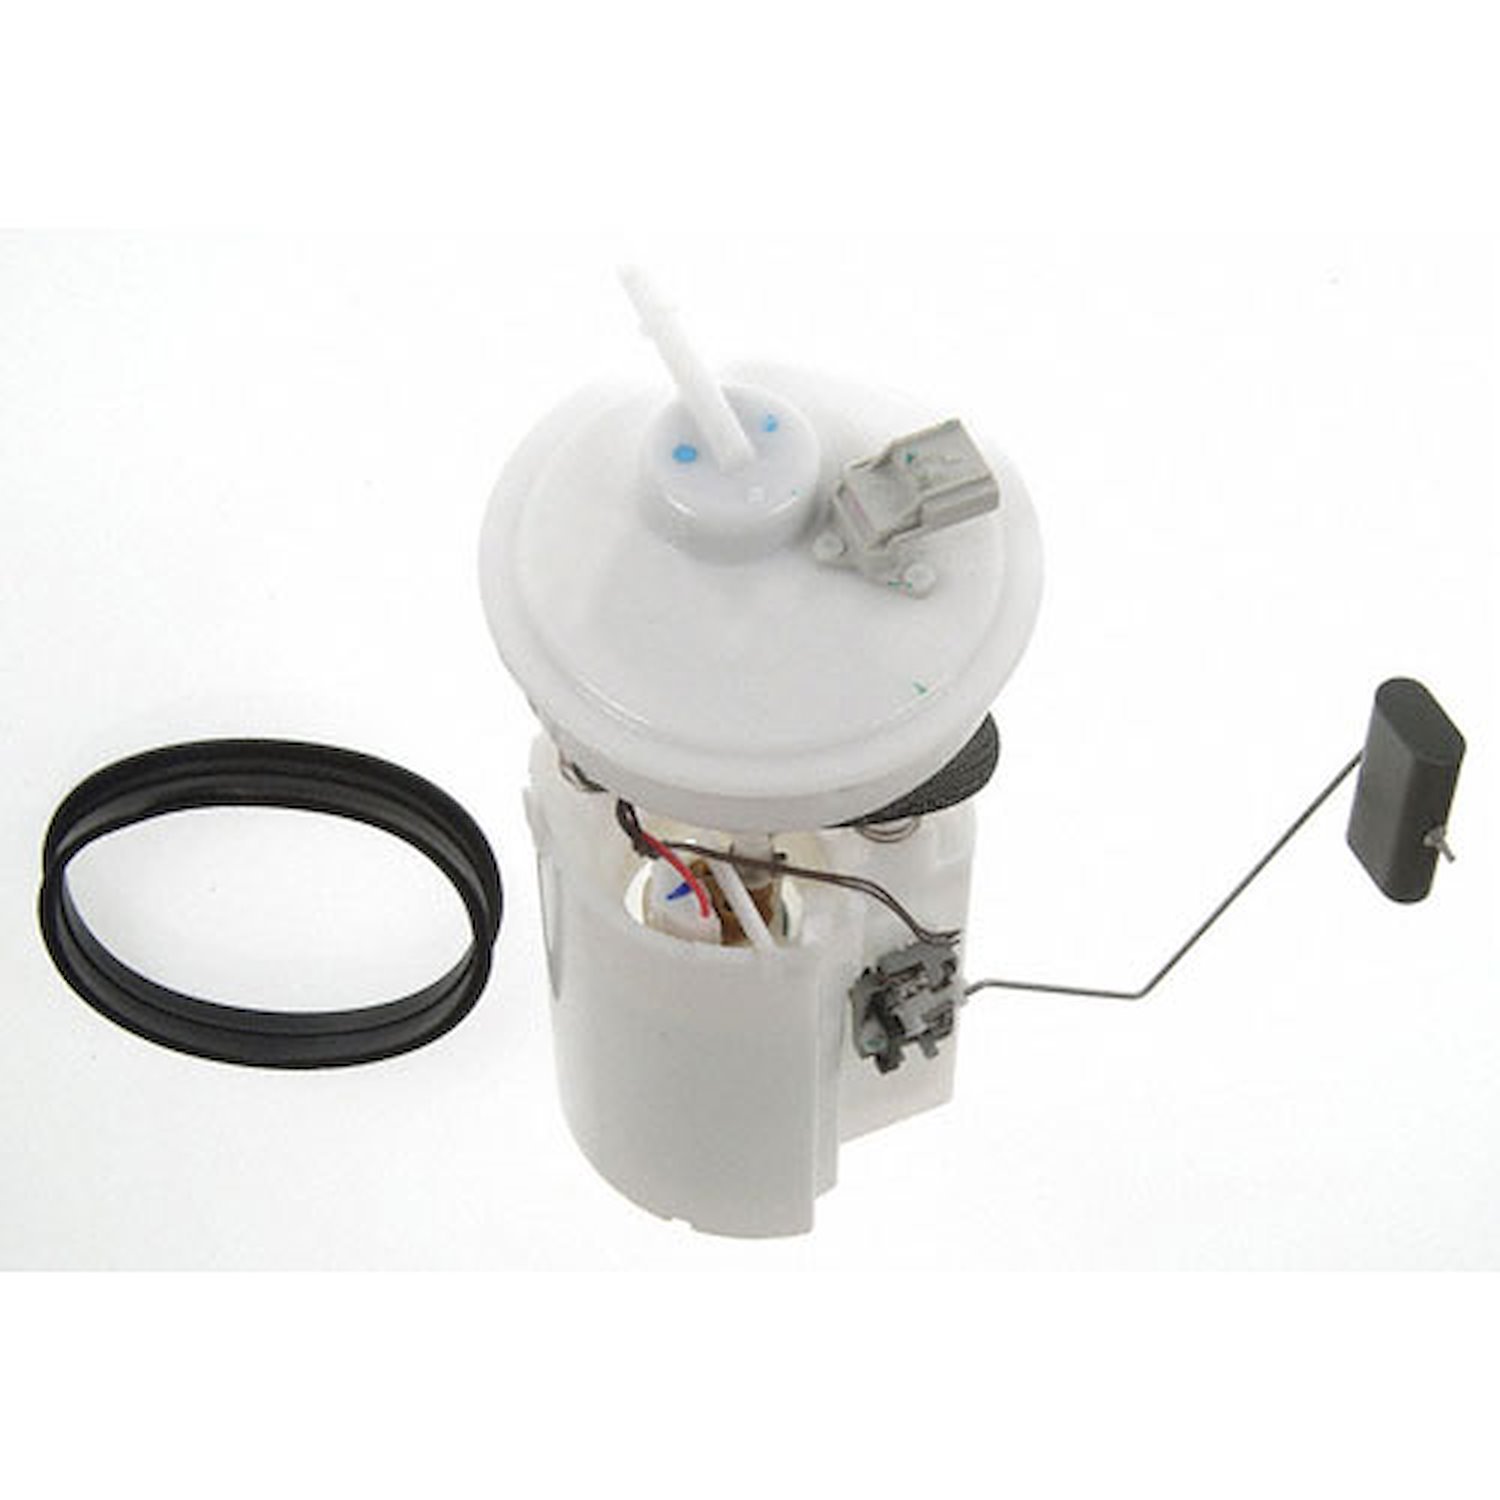 OE Chrysler/Dodge Replacement Electric Fuel Pump Module Assembly 2001-03 Chrysler PT Cruiser 2.4L 4 Cyl